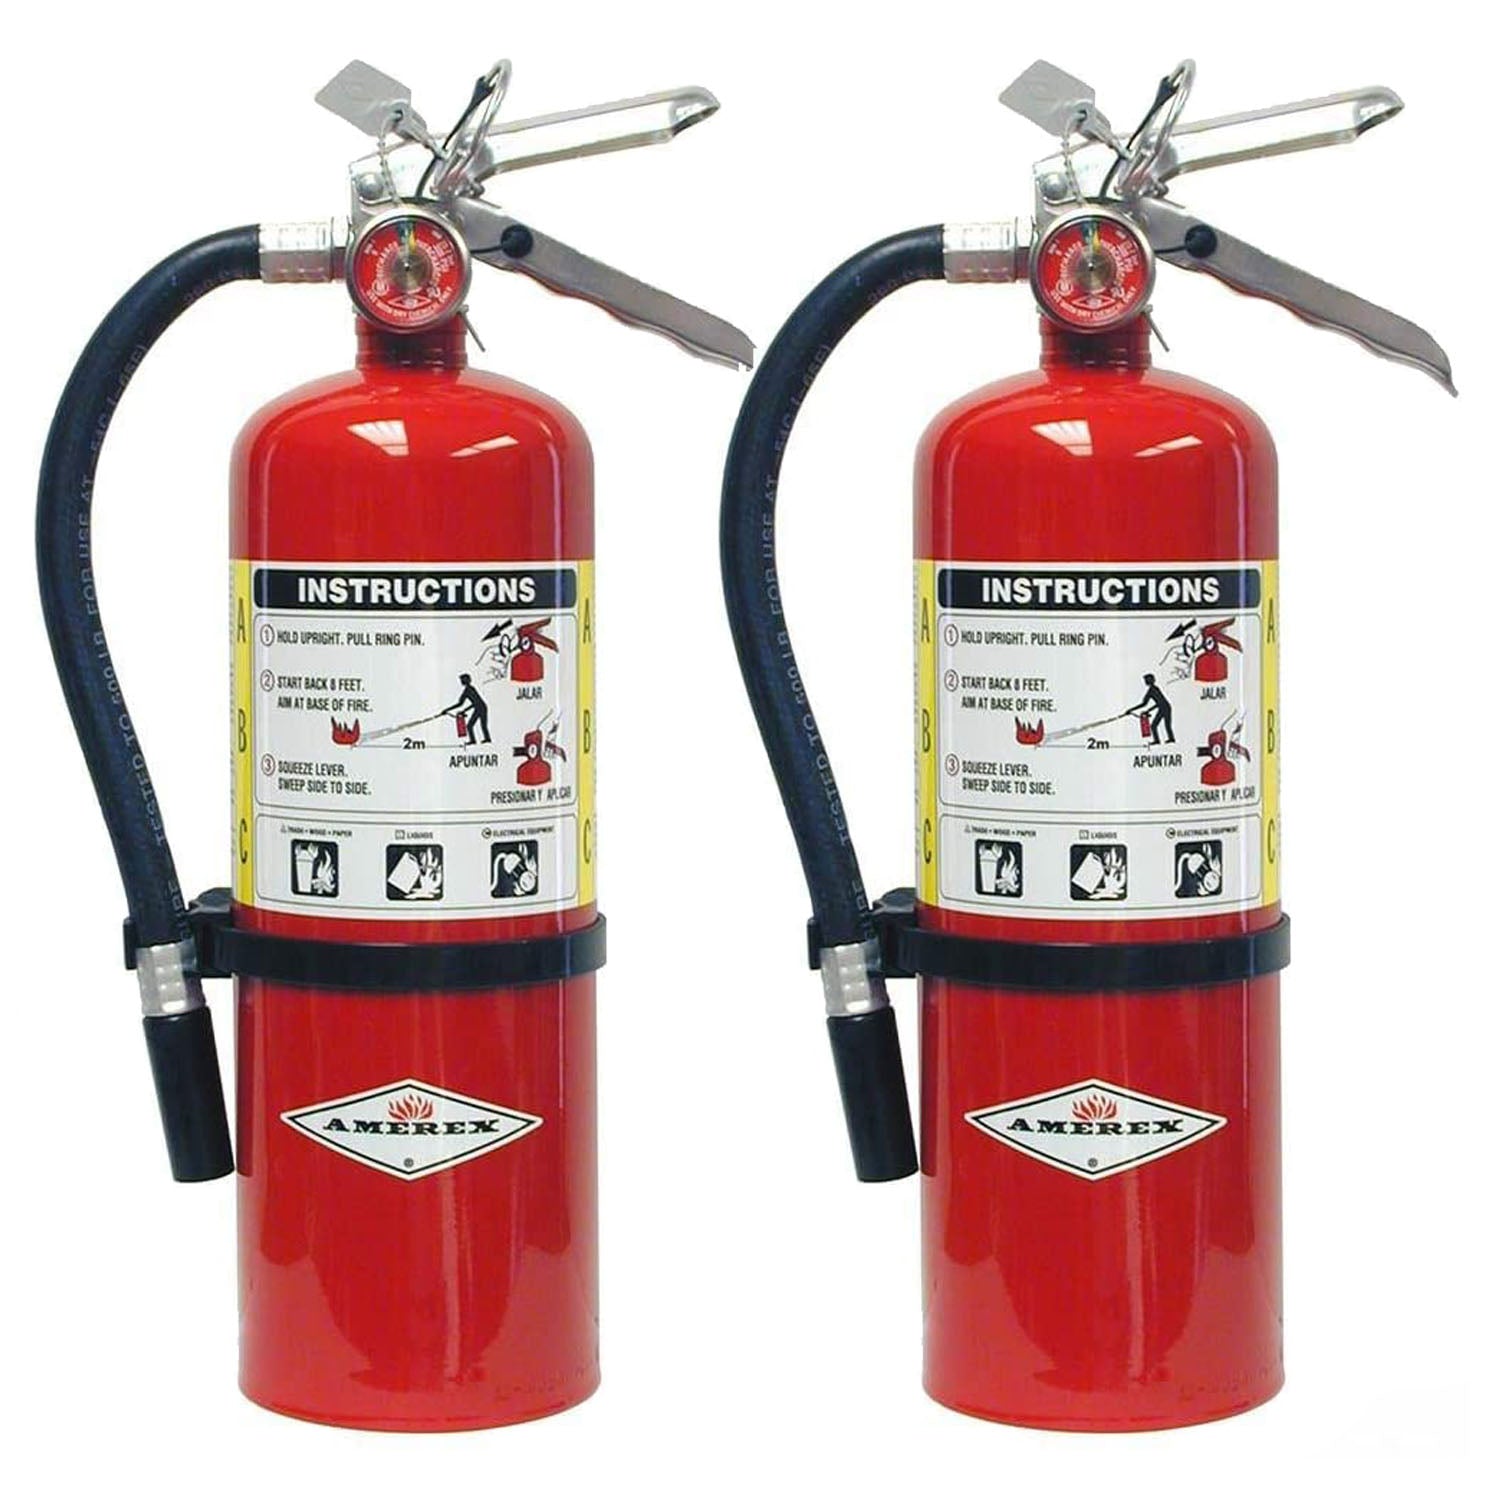 AMEREX B402 Fire Extinguisher, Dry Chemical, 3A:40B:C - 2 Pack - Pro-Distributing